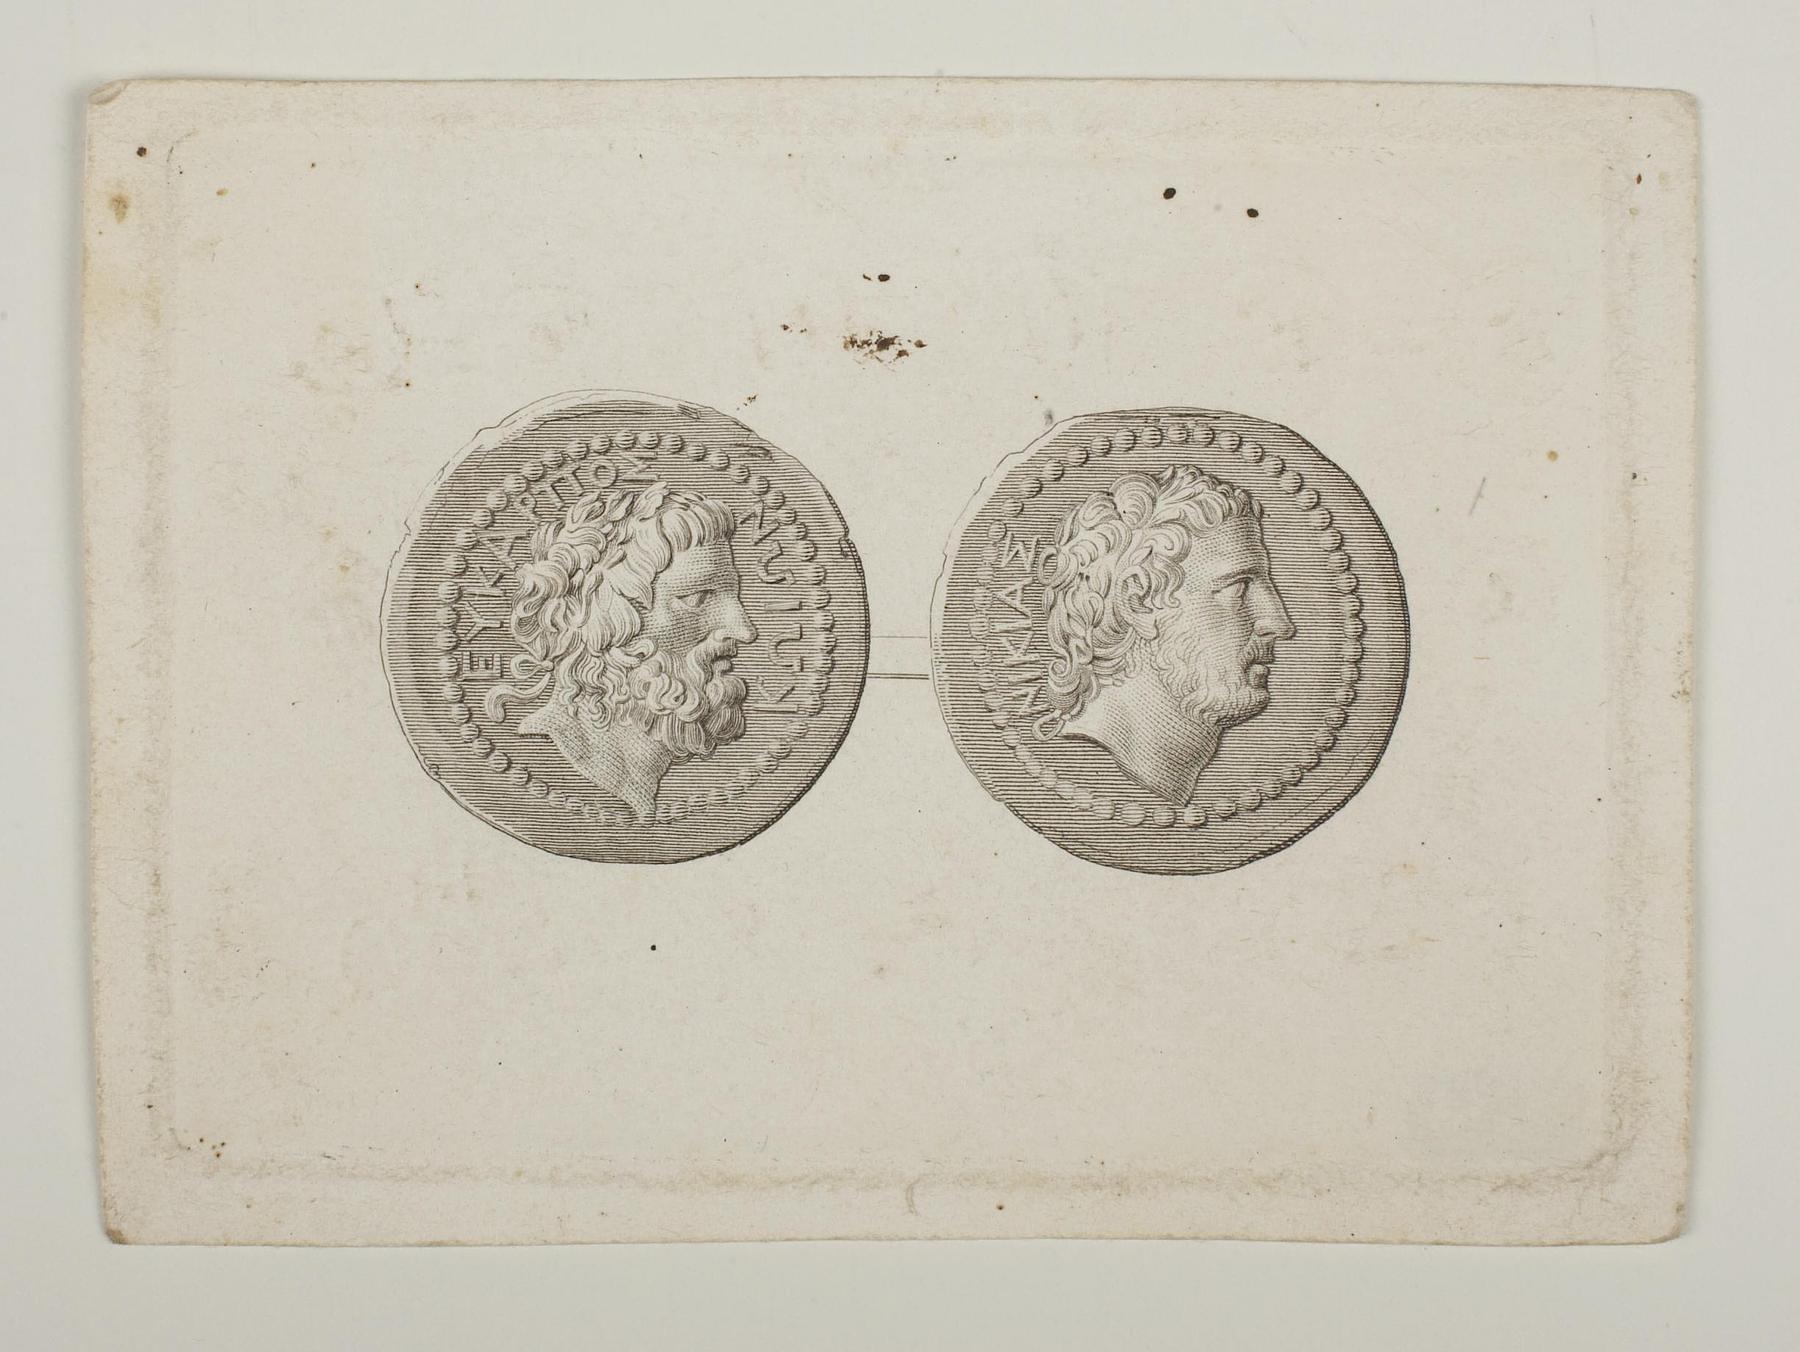 Greek coins obverse and reverse, E1563